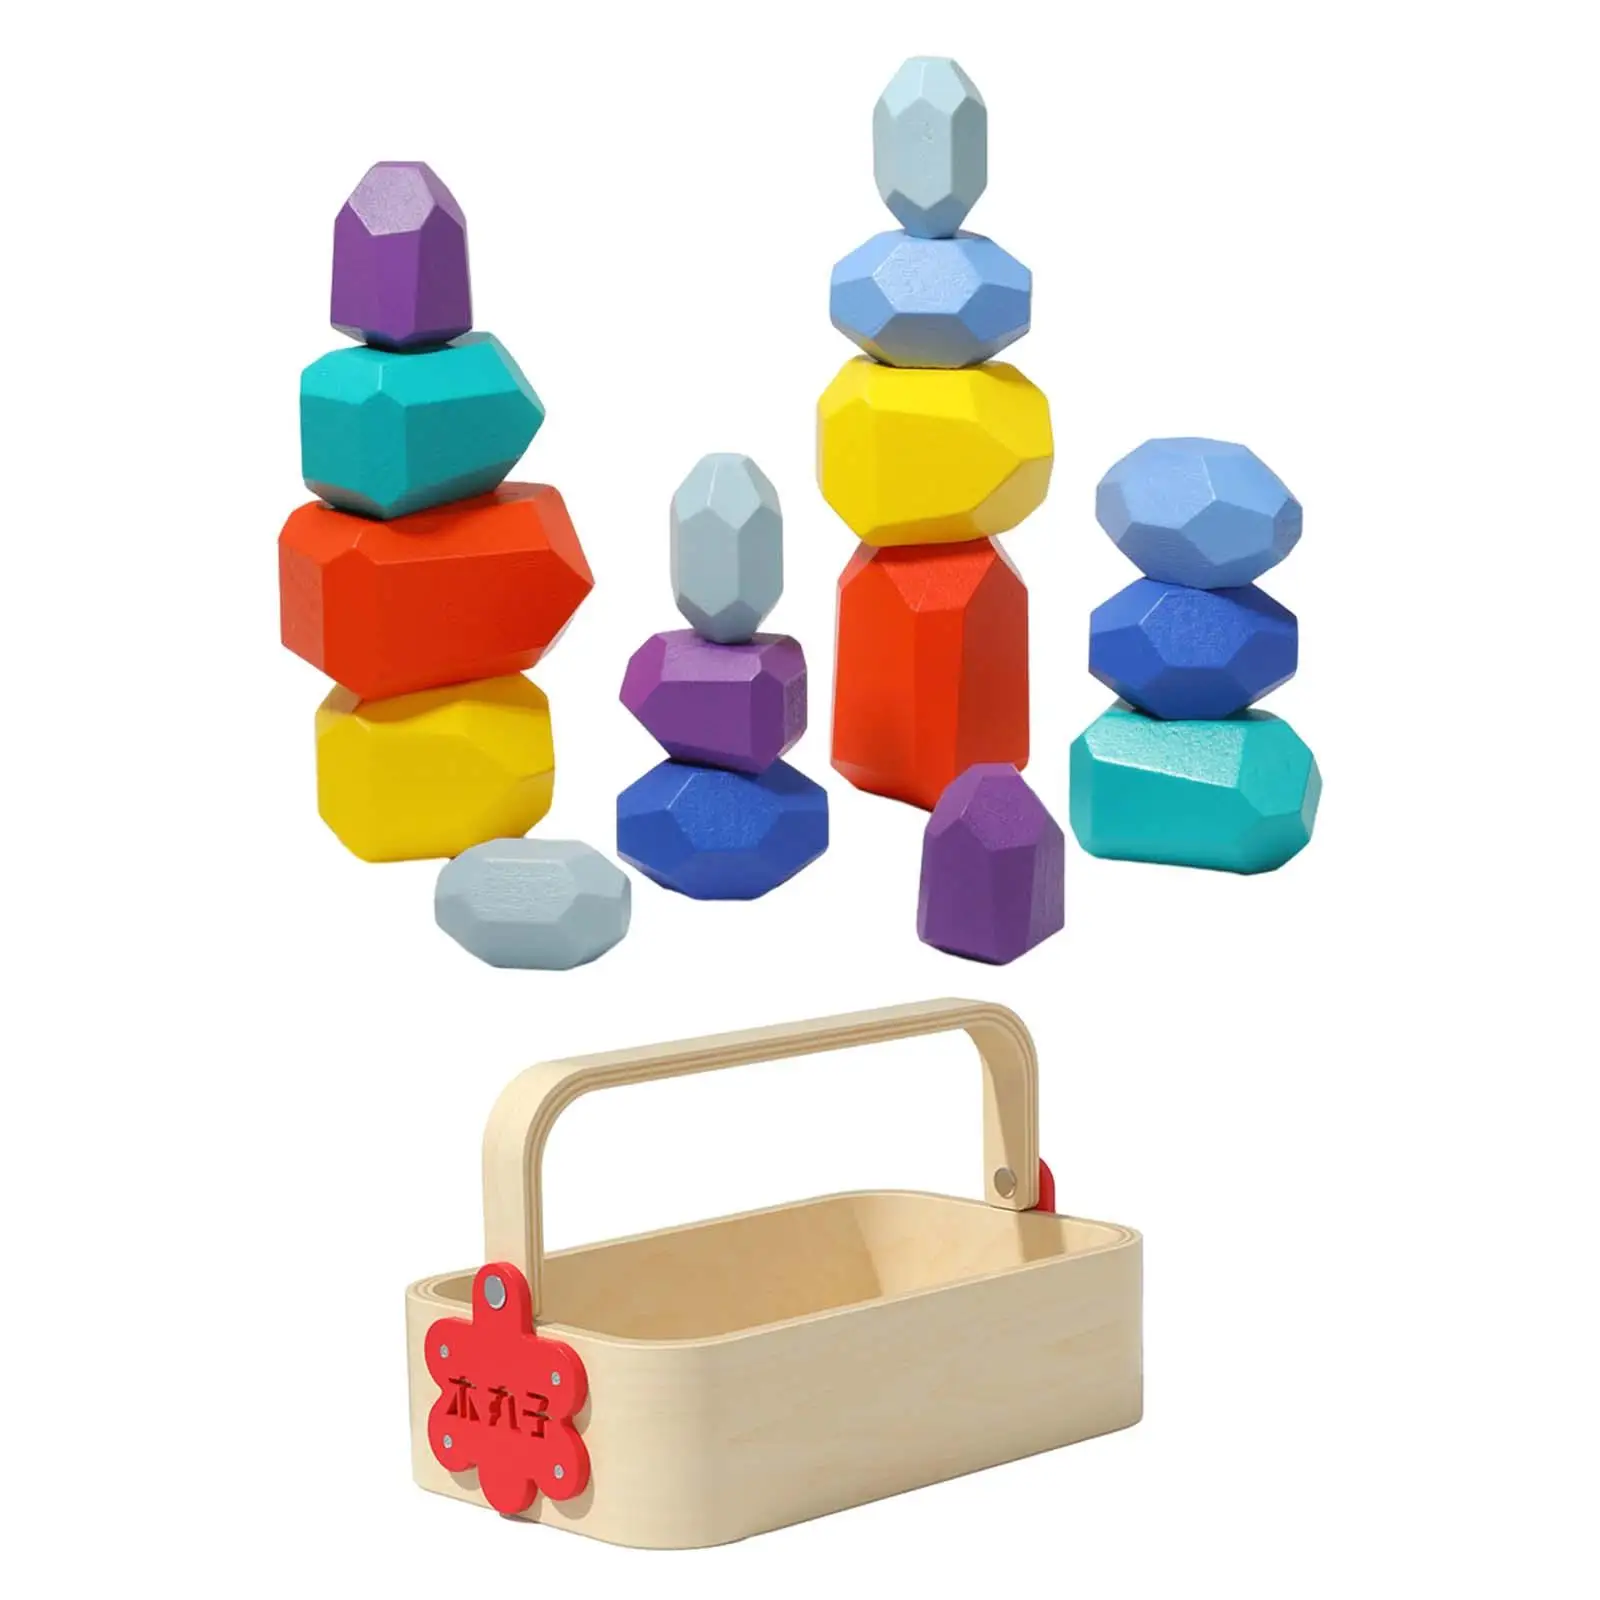 Stacking Blocks Rocks Wooden Balance Training Toys Hands on Montessori Toys Colorful Building Blocks for Children Girls Gifts